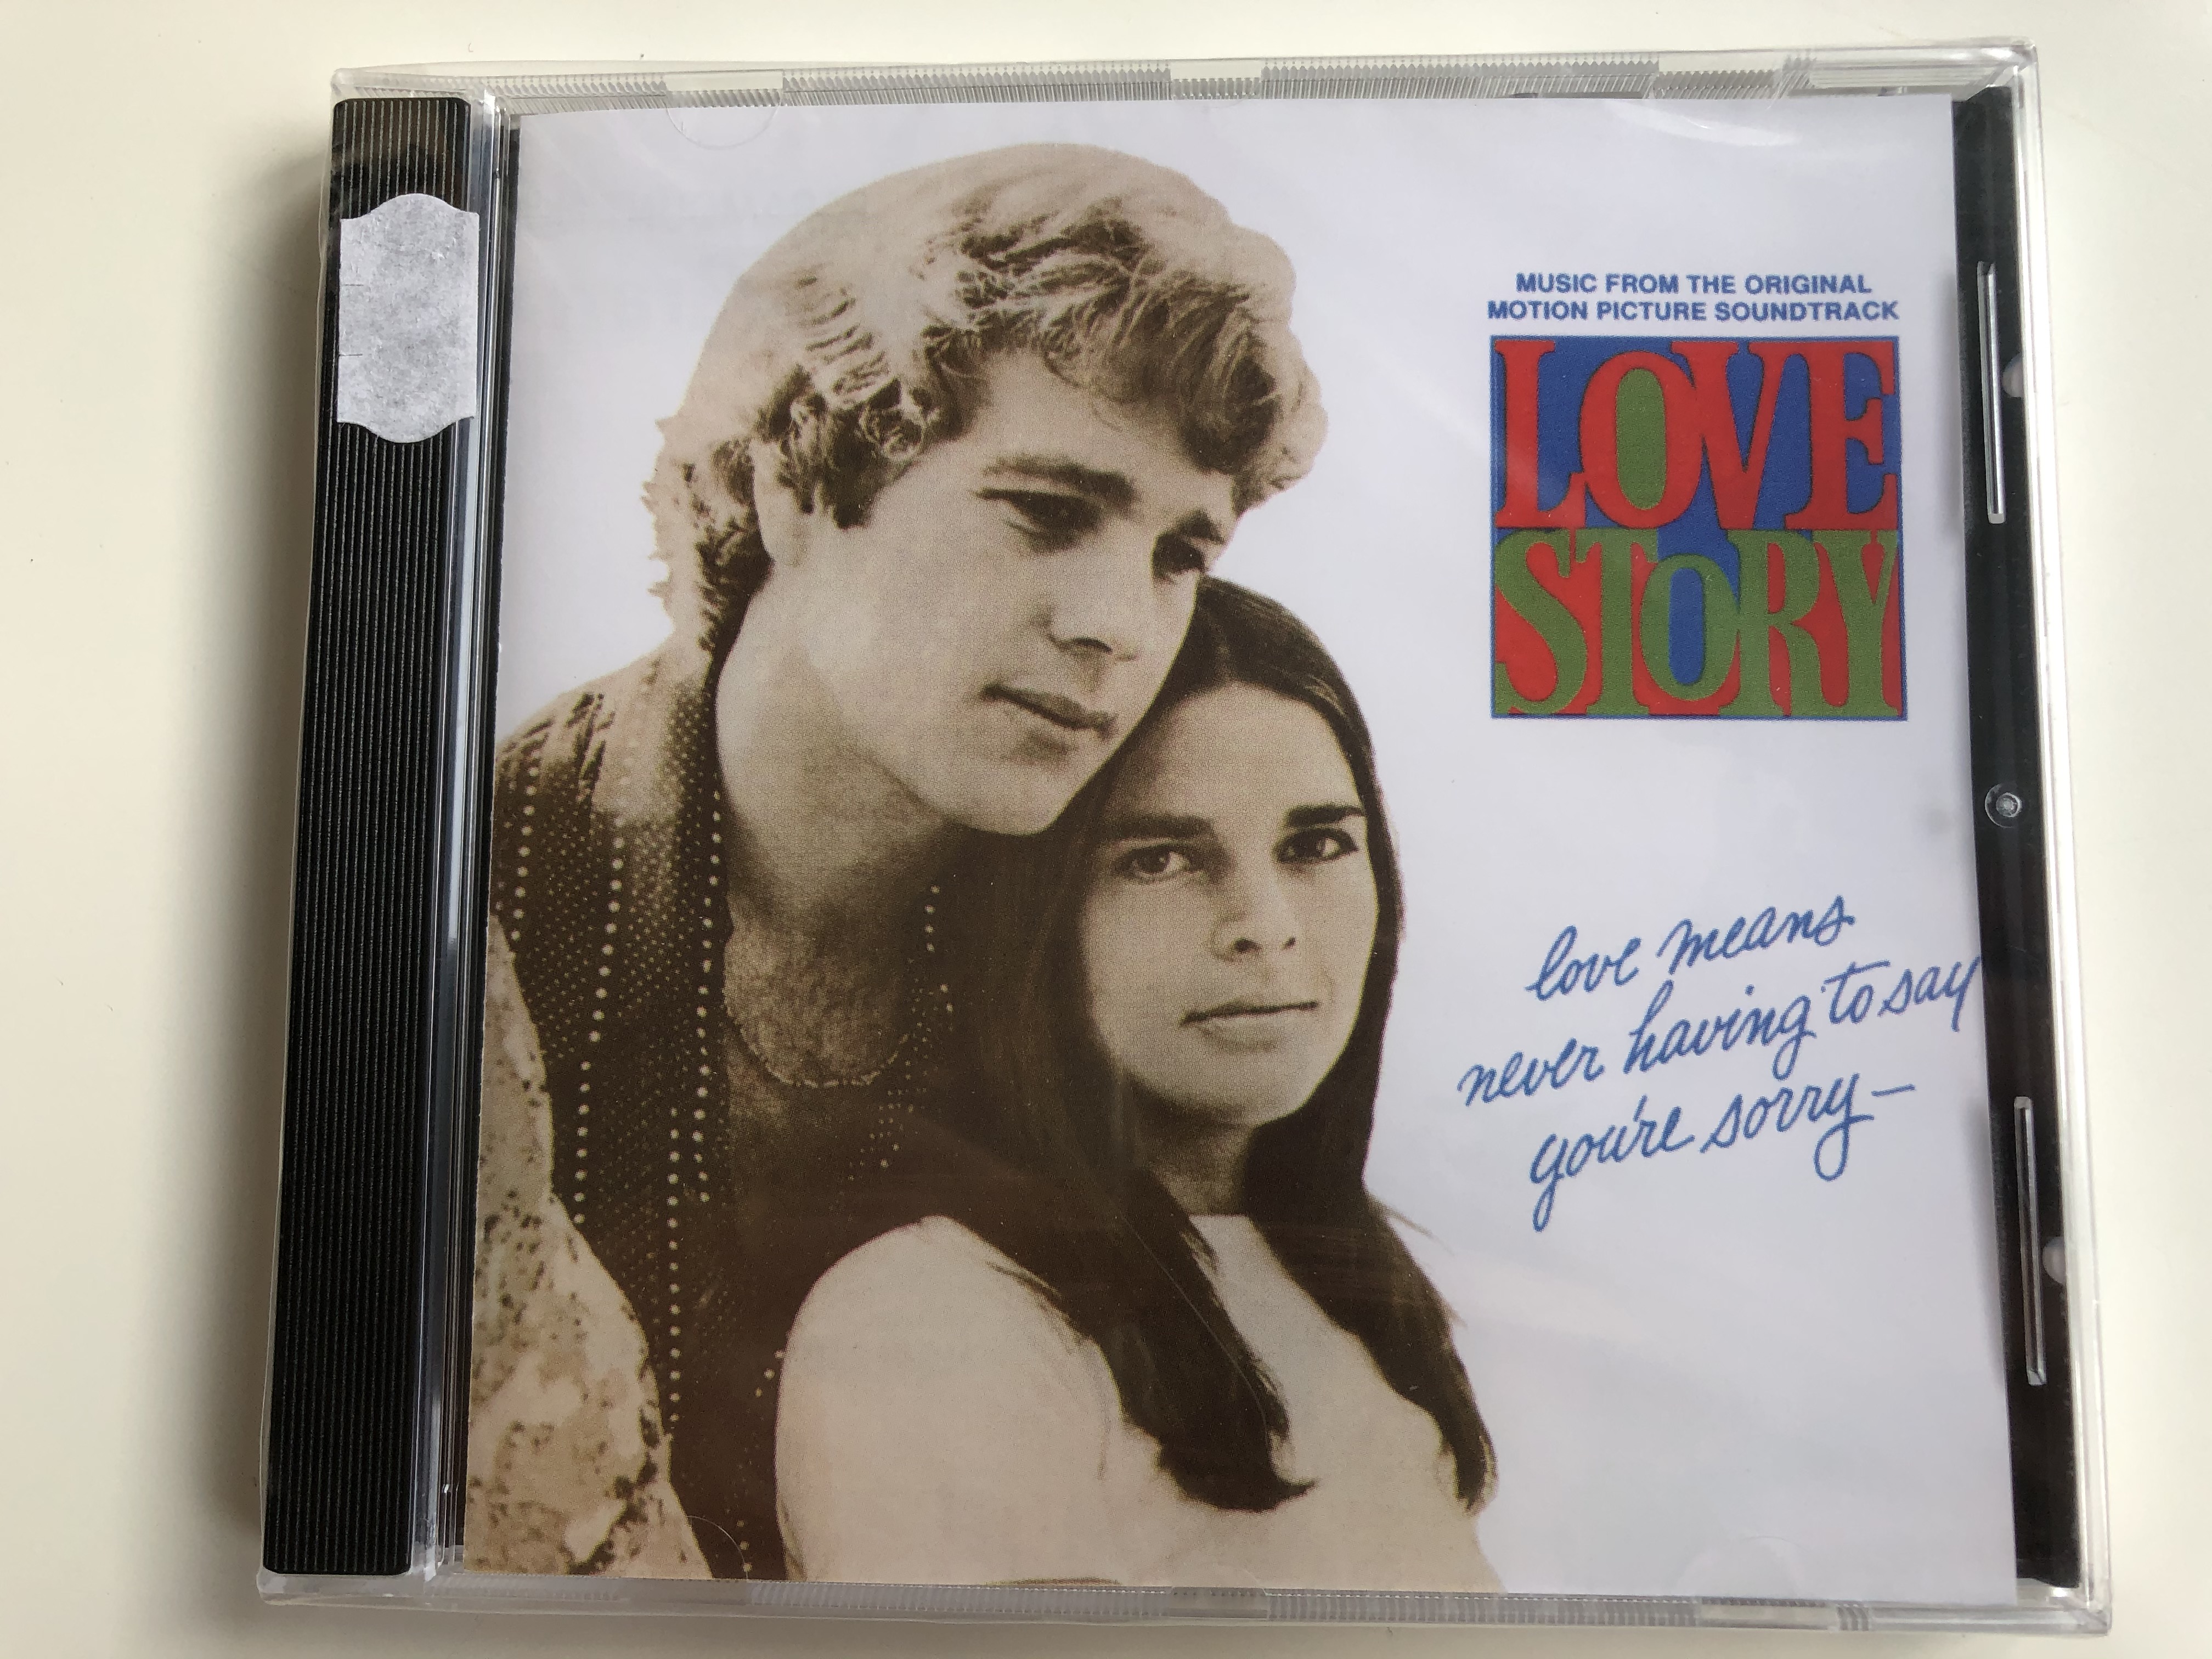 music-from-the-original-motion-picture-soundtrack-love-story-mca-records-audio-cd-mcld-19157-1-.jpg